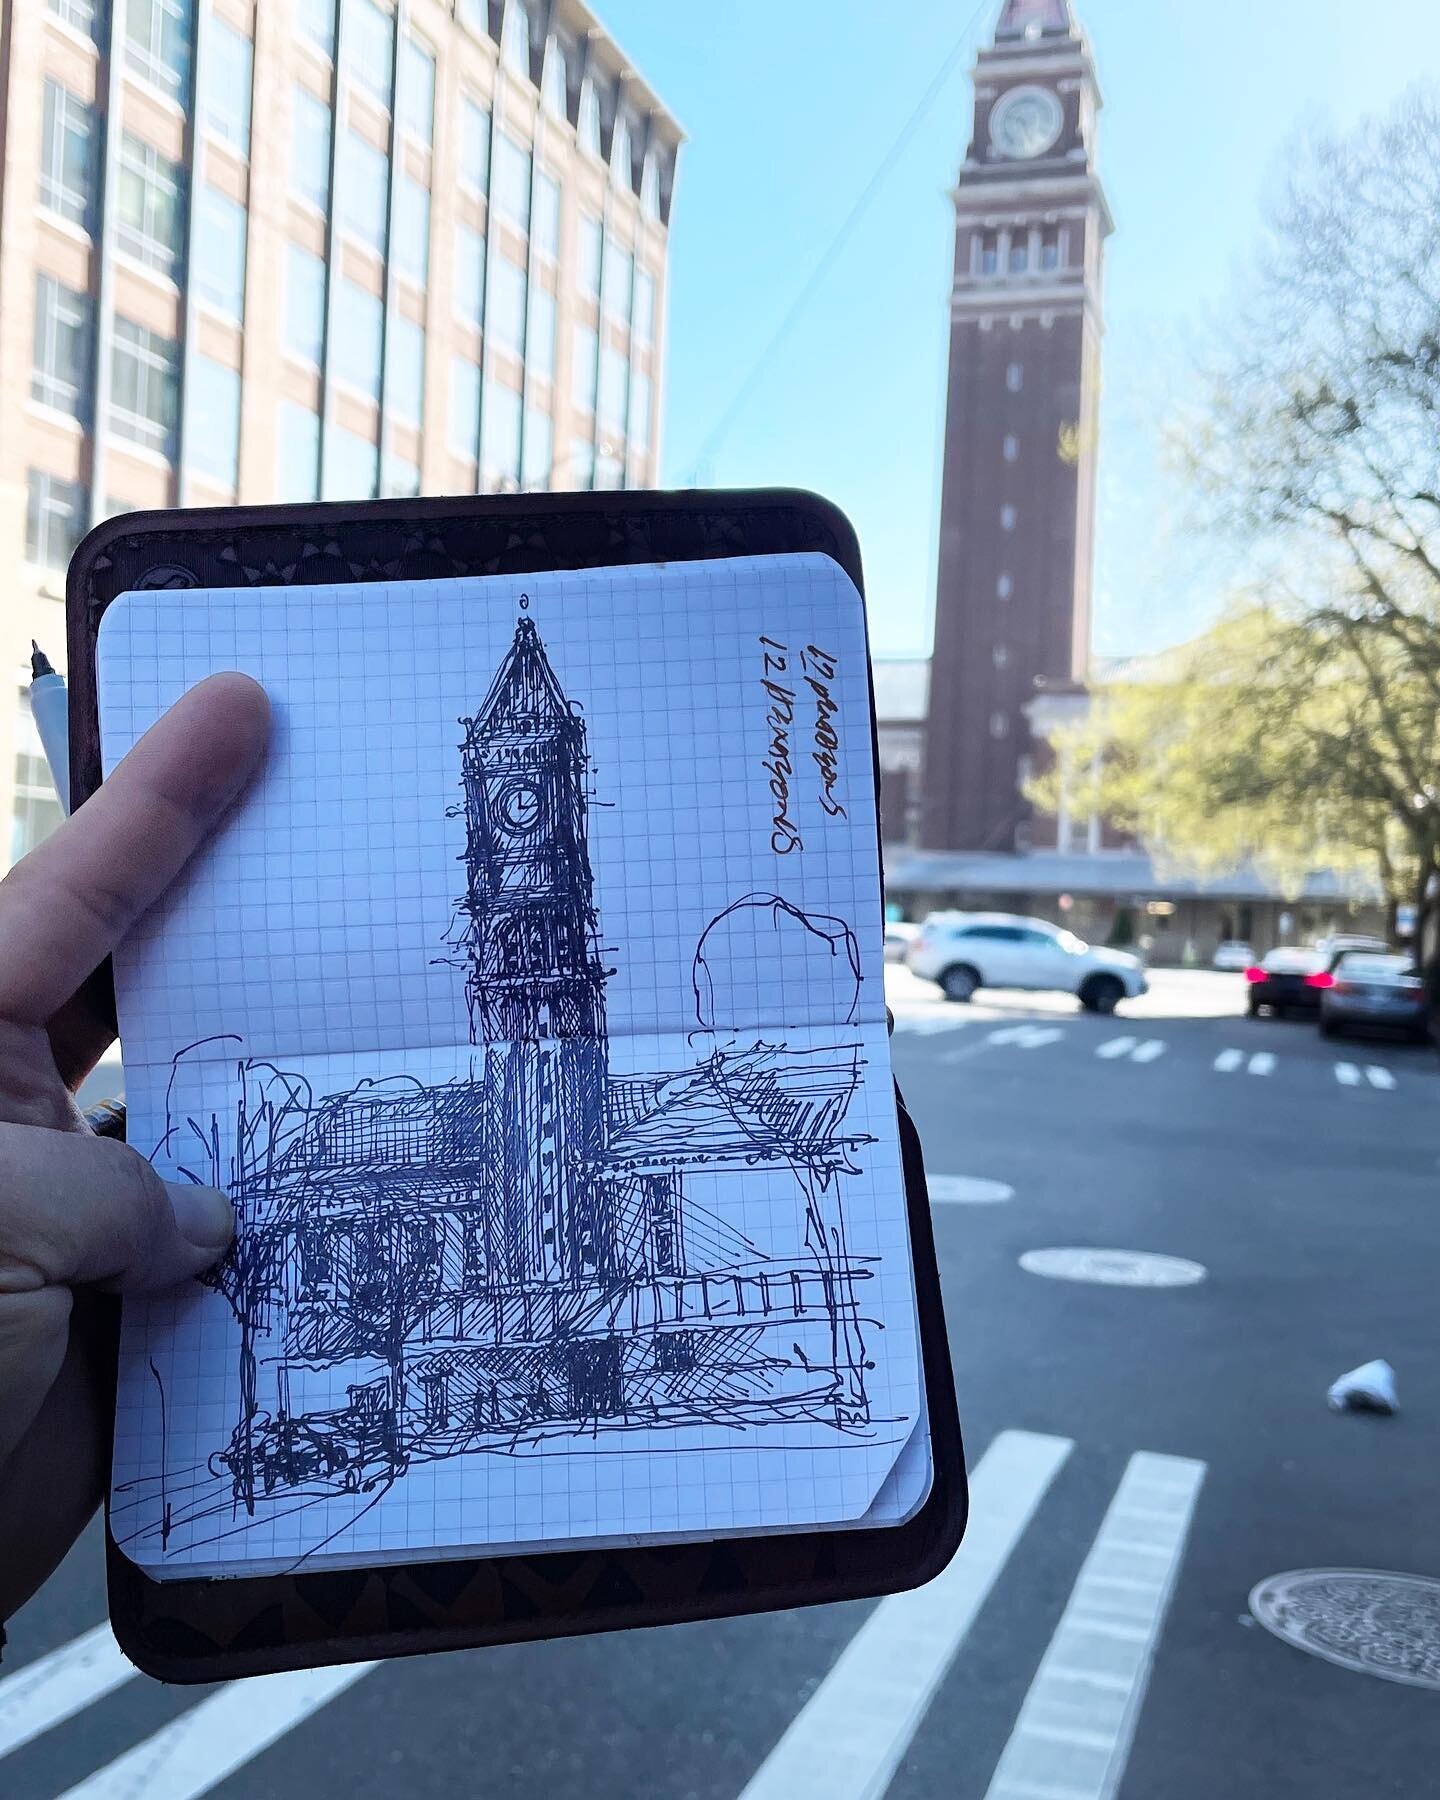 I never have enough time to sketch all the architecture that I want.  Today I stopped and took all the time I needed to capture the shadows of the king street station.  Such an icon of the pioneer square neighborhood.  #urbansketching #urbansketchers